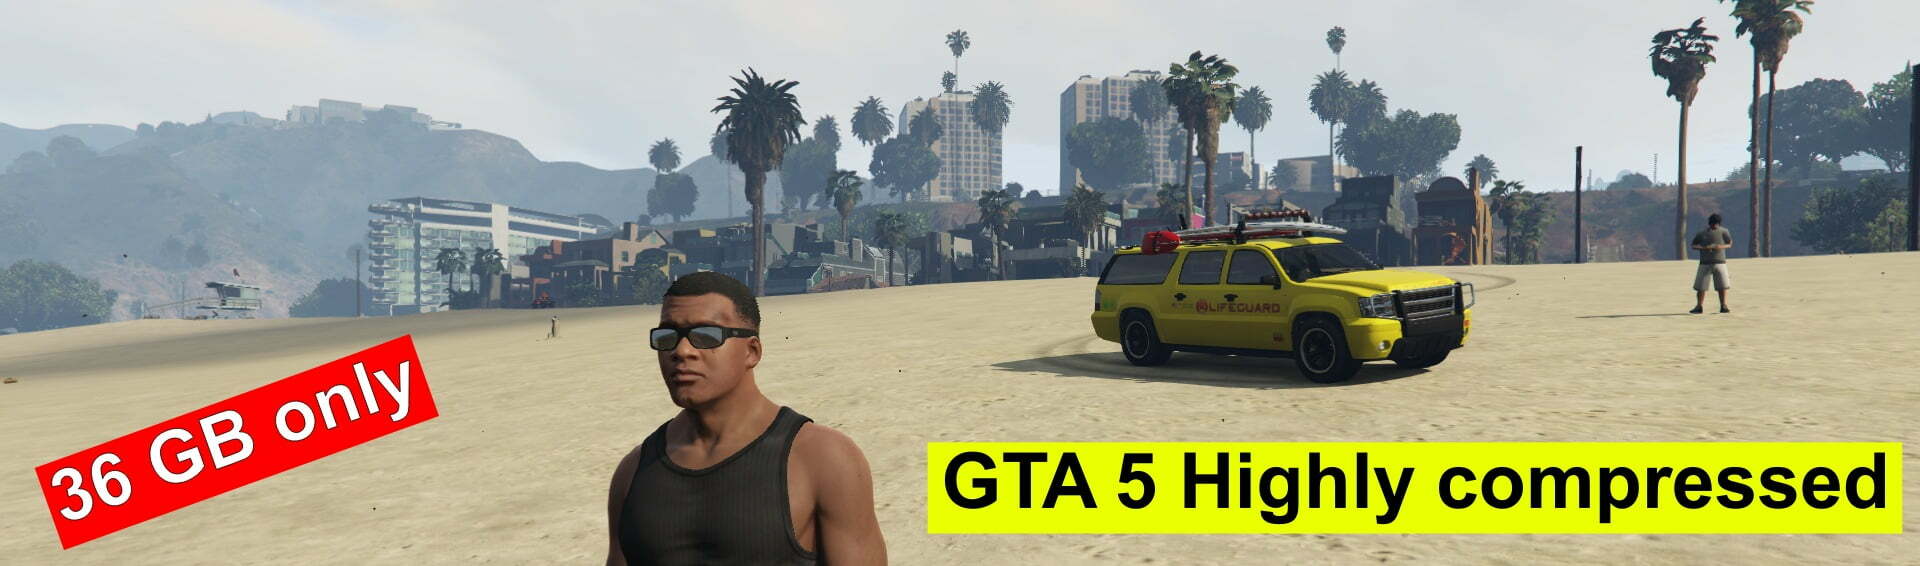 36 Gb) - Gta 5 Highly Compressed Download For Pc